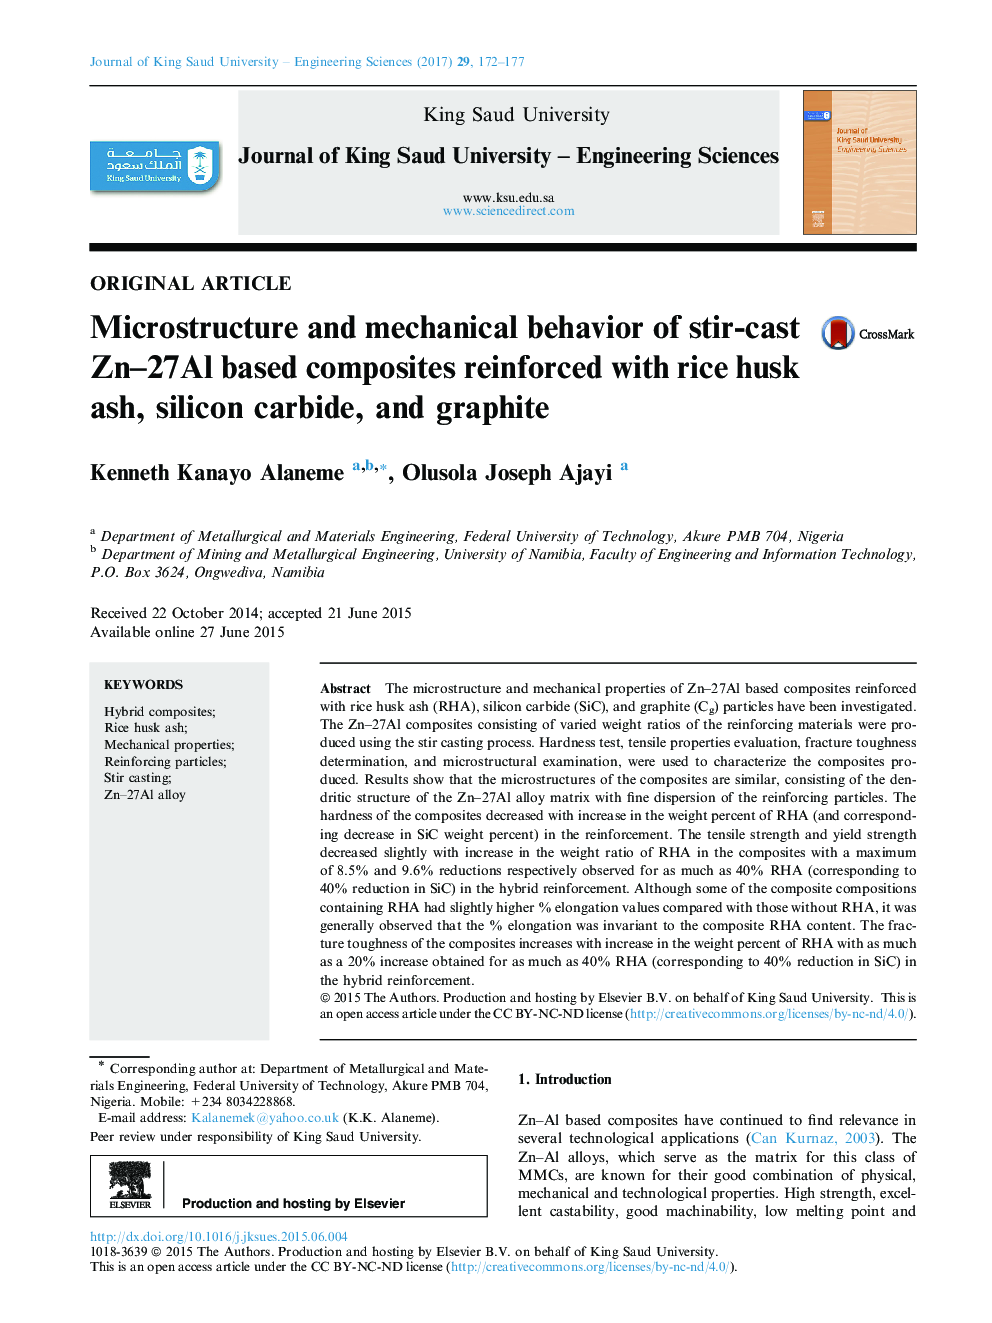 Microstructure and mechanical behavior of stir-cast Zn-27Al based composites reinforced with rice husk ash, silicon carbide, and graphite